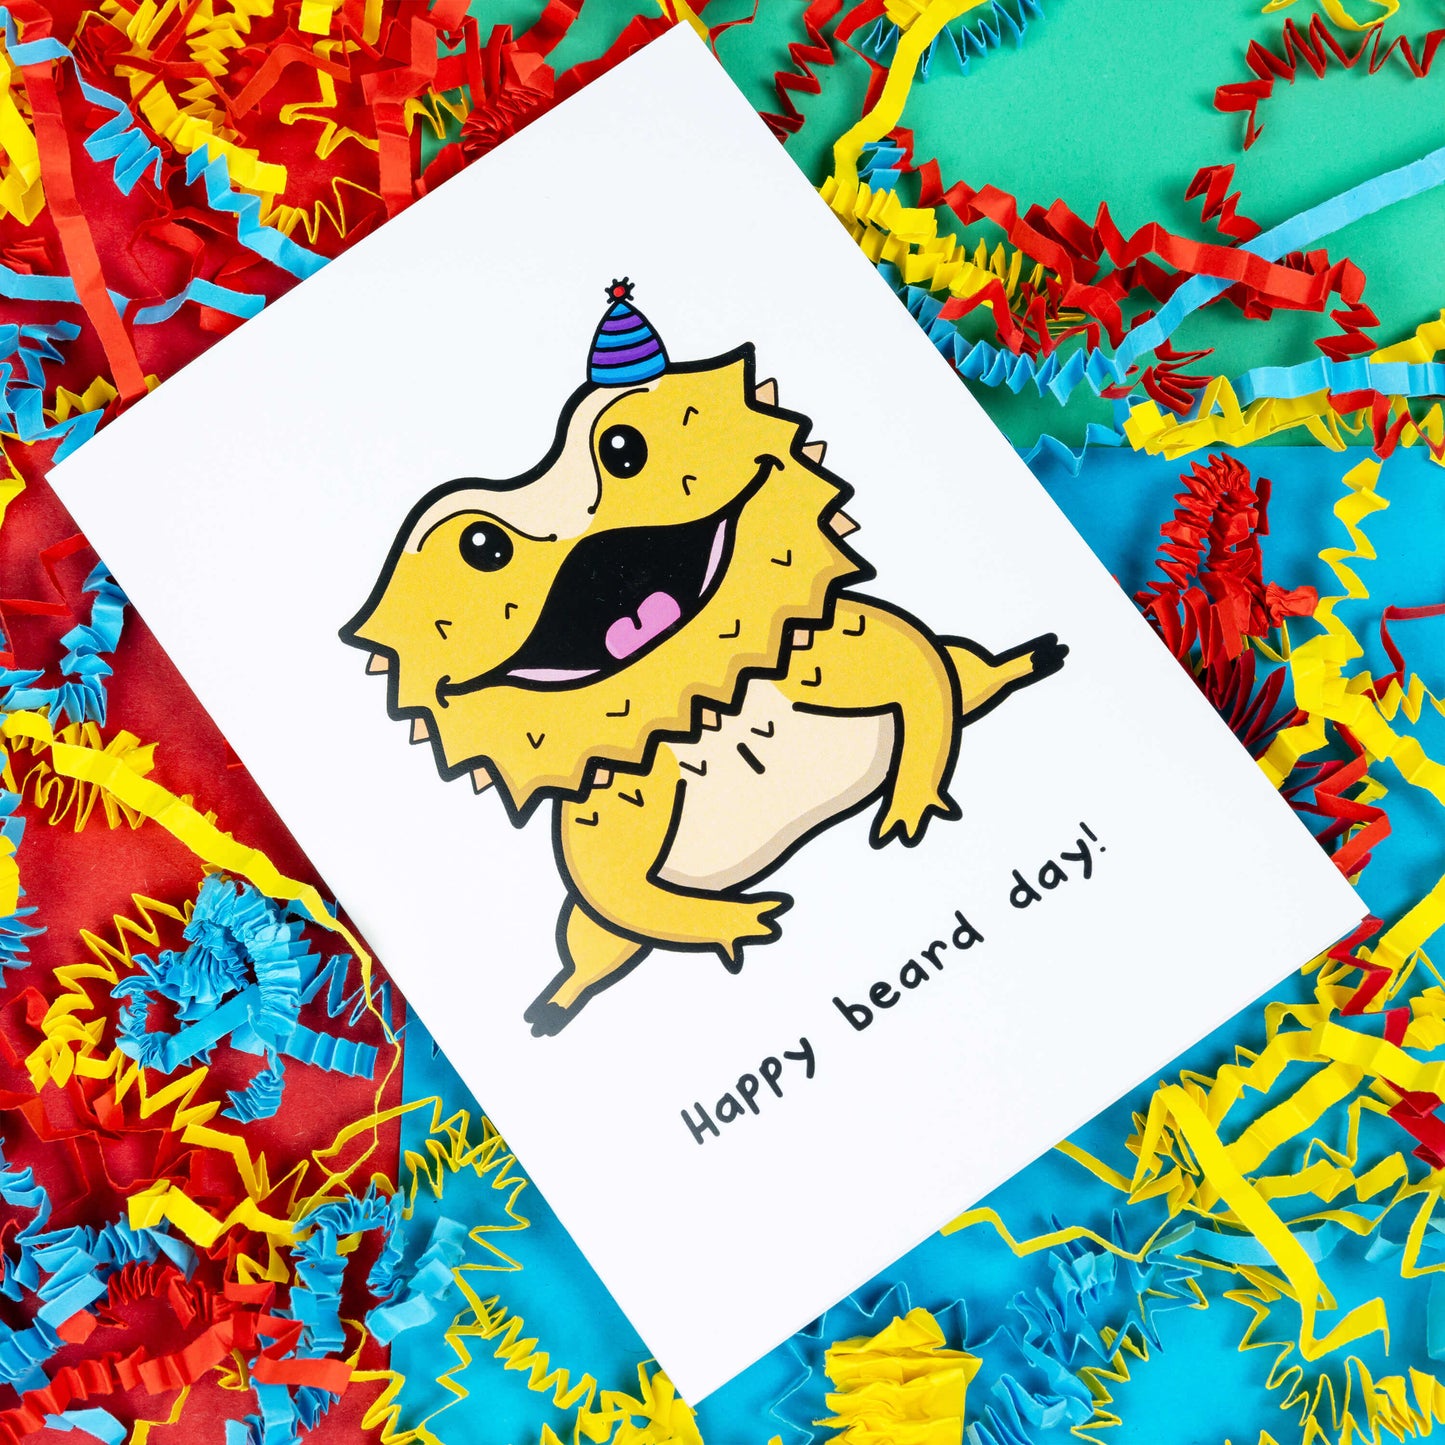 Happy Beard Day - Bearded Dragon A6 Birthday Card on a green, blue and red background with yellow, blue and red crinkled card confetti. The white card features a happy bearded dragon reptile wearing a purple stripe party hat, underneath in black reads Happy Beard Day!